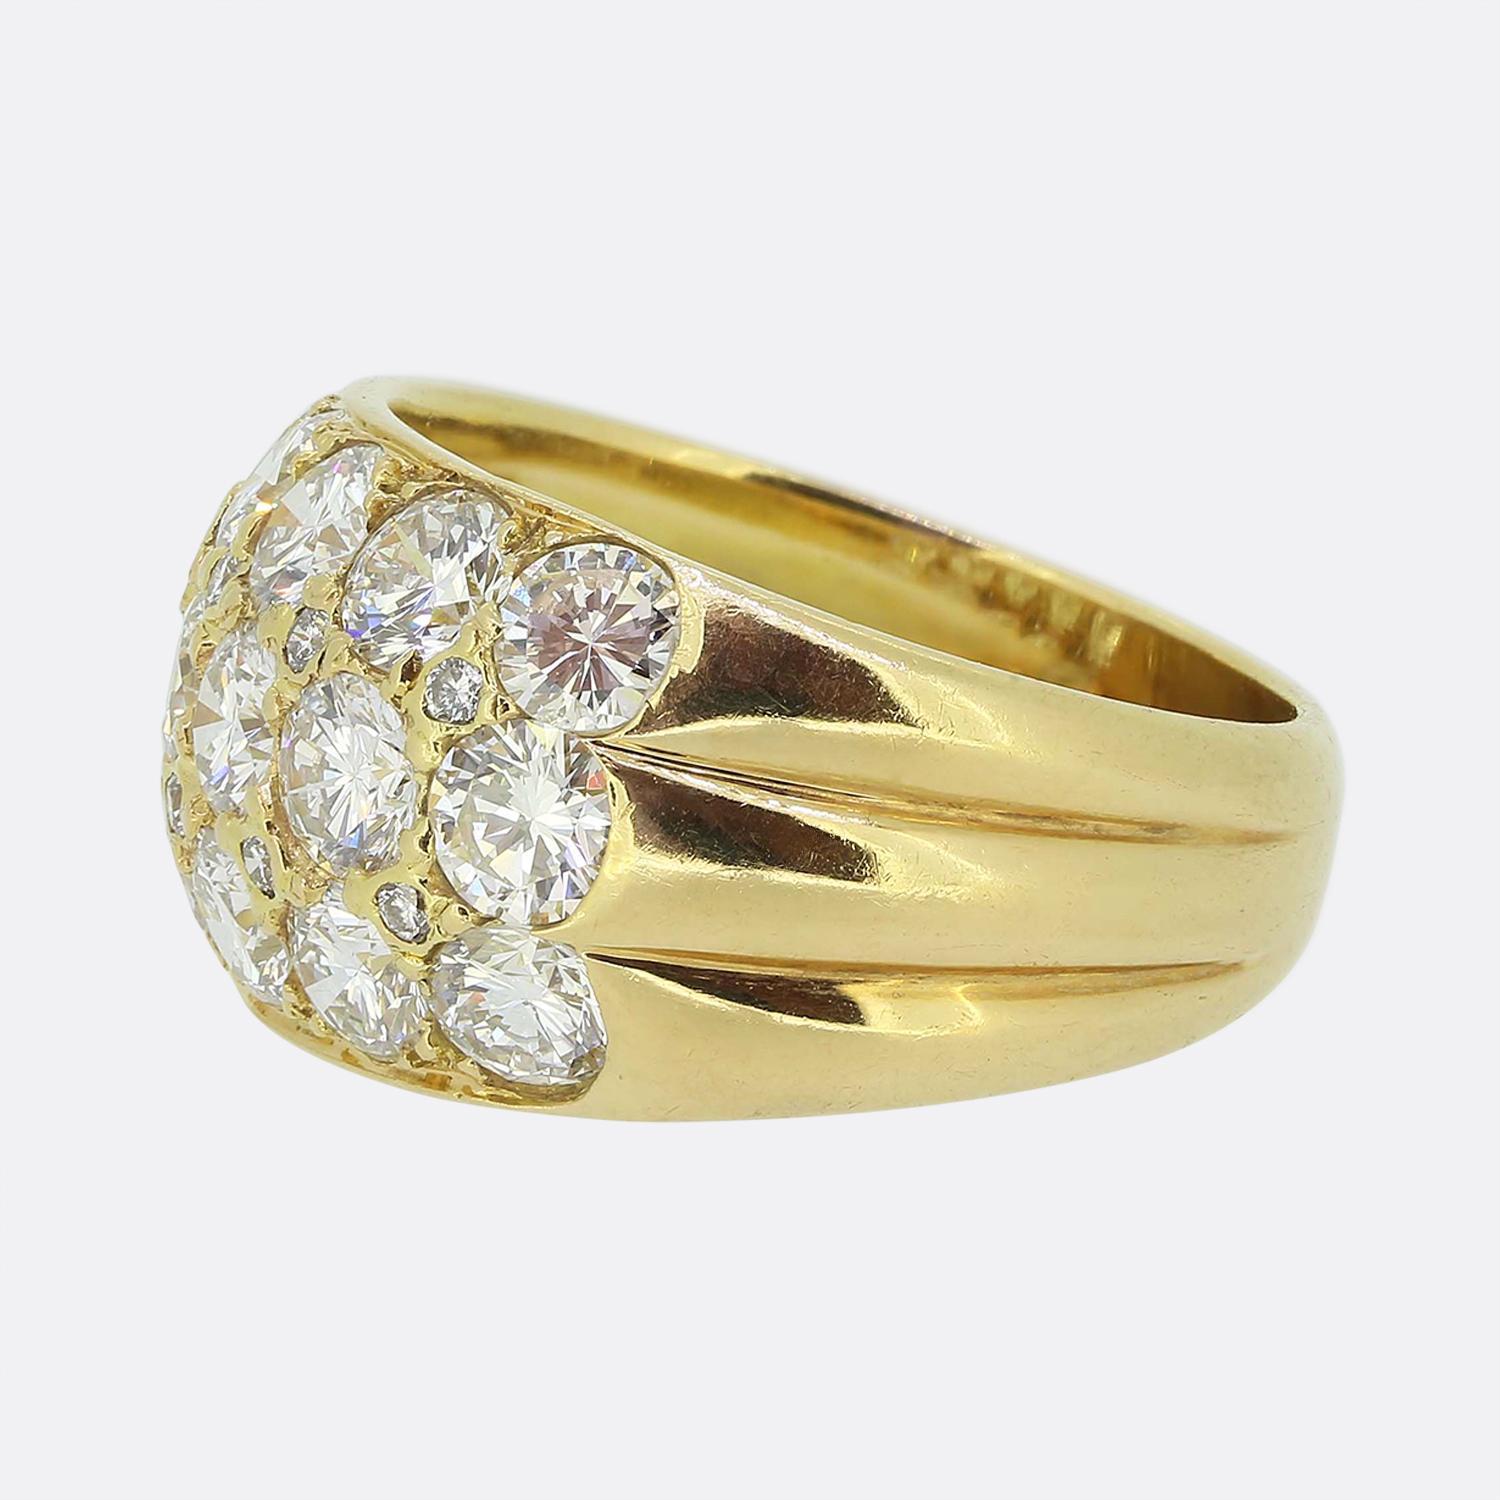 Here we have a fabulous cluster ring. This vintage piece was crafted in France from a rich 18ct yellow gold and showcases a pair of wide ribbed shoulders flanking a centralised cluster at the face formed of three rows of bright white round brilliant